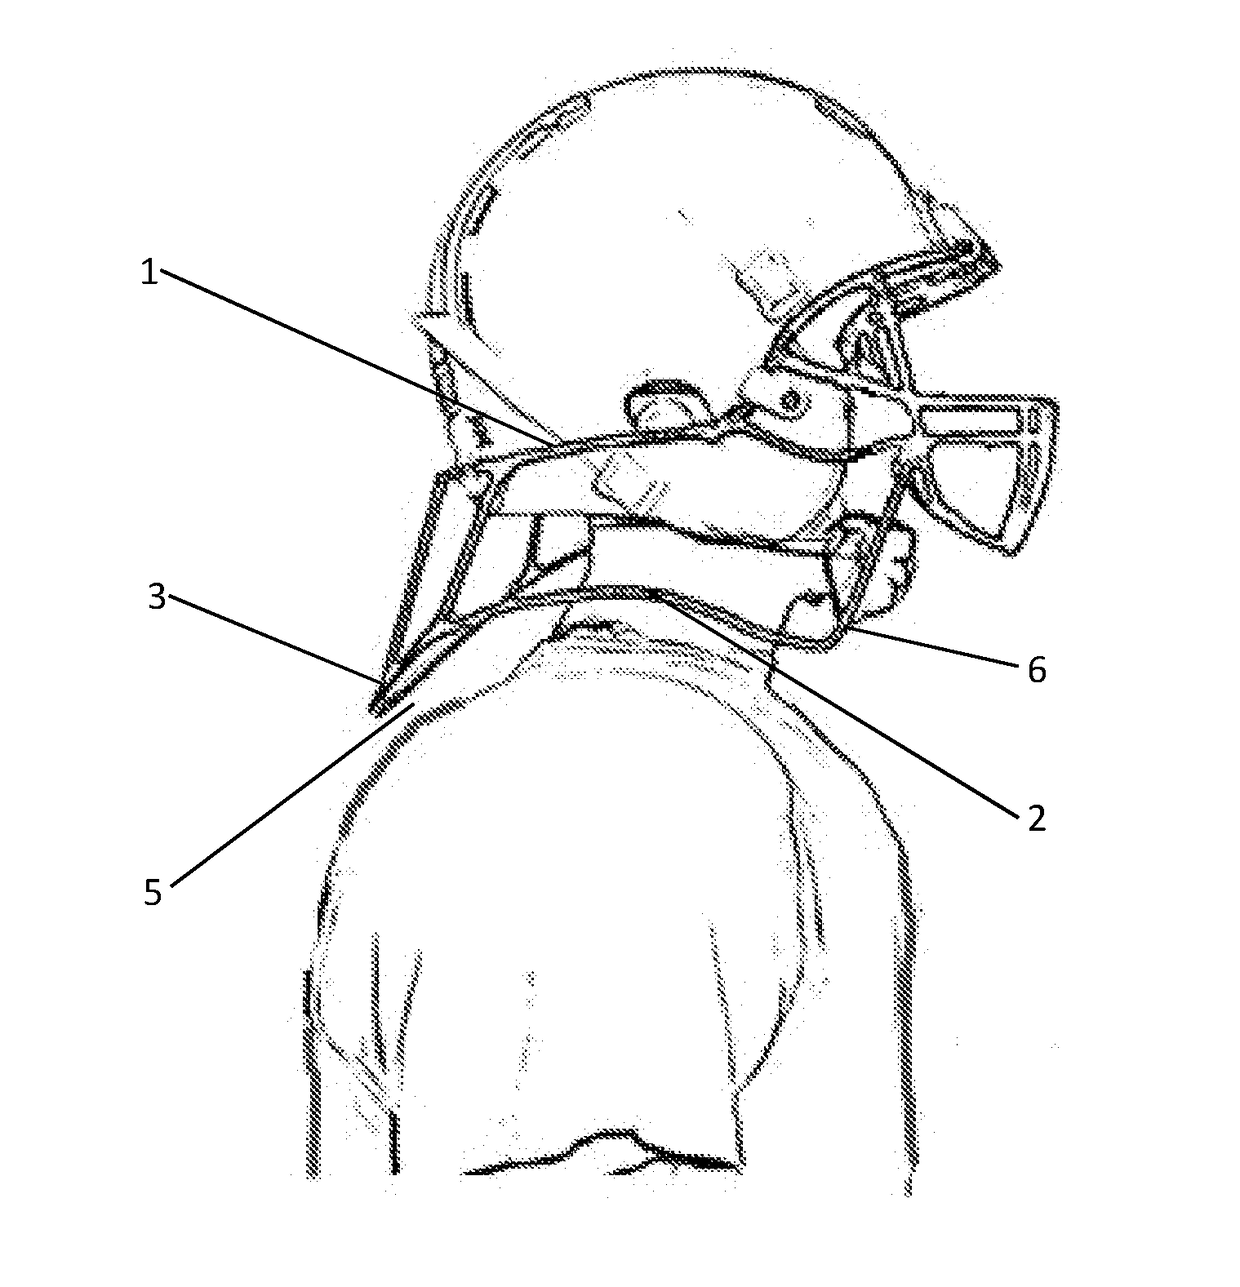 Concussive Reduction Helmet Attachment(s) Translational Axial Rotation Control and Bracing System (TARCBS).